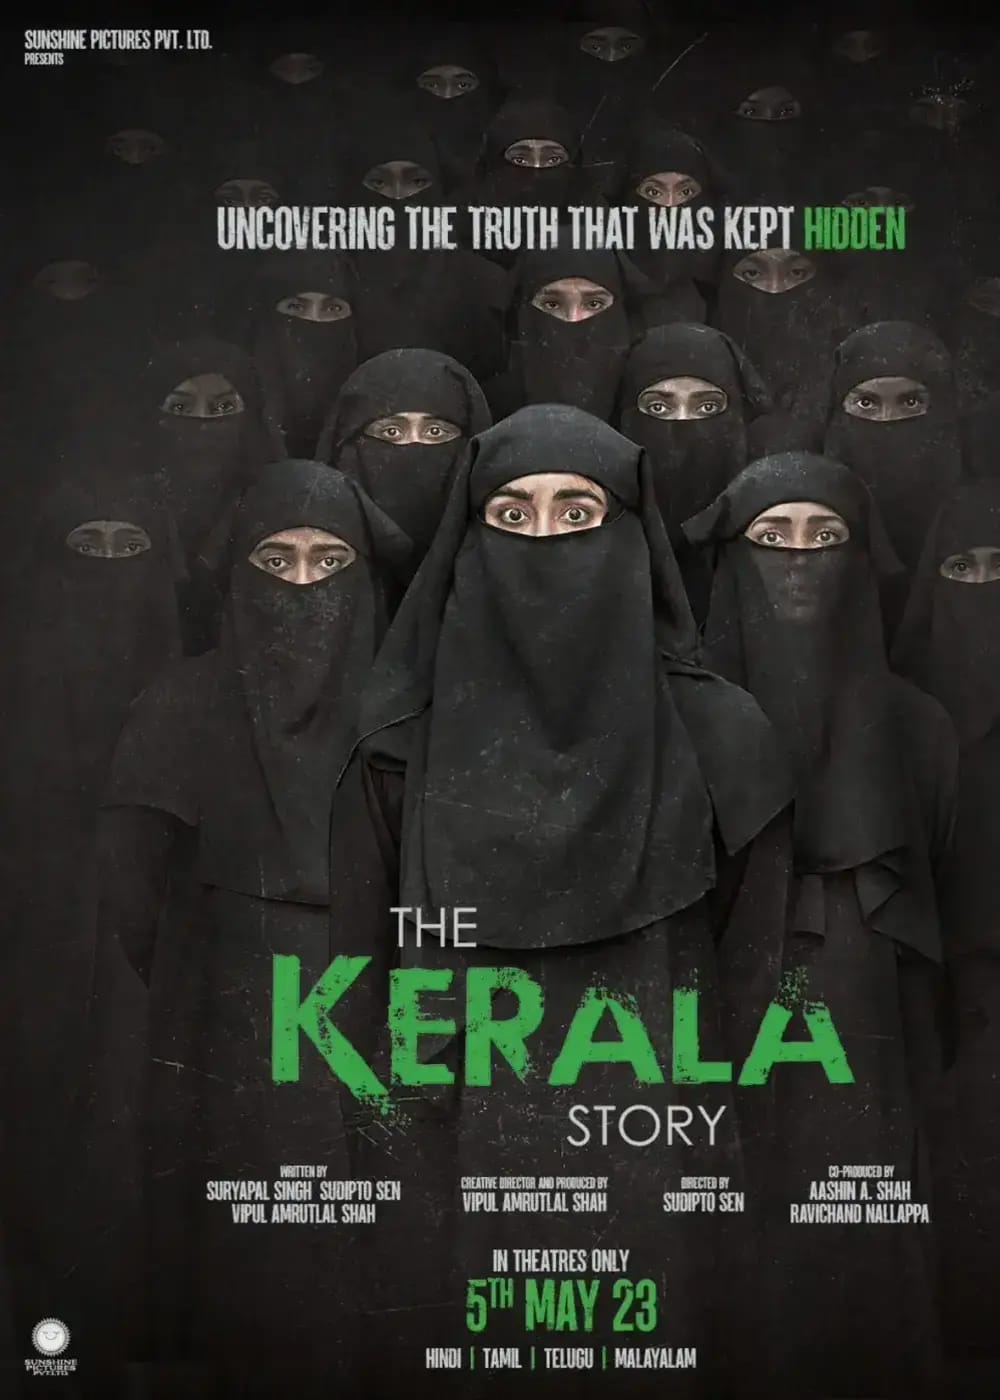 The Kerala Story Movie (2023) Release Date, Review, Cast, Trailer